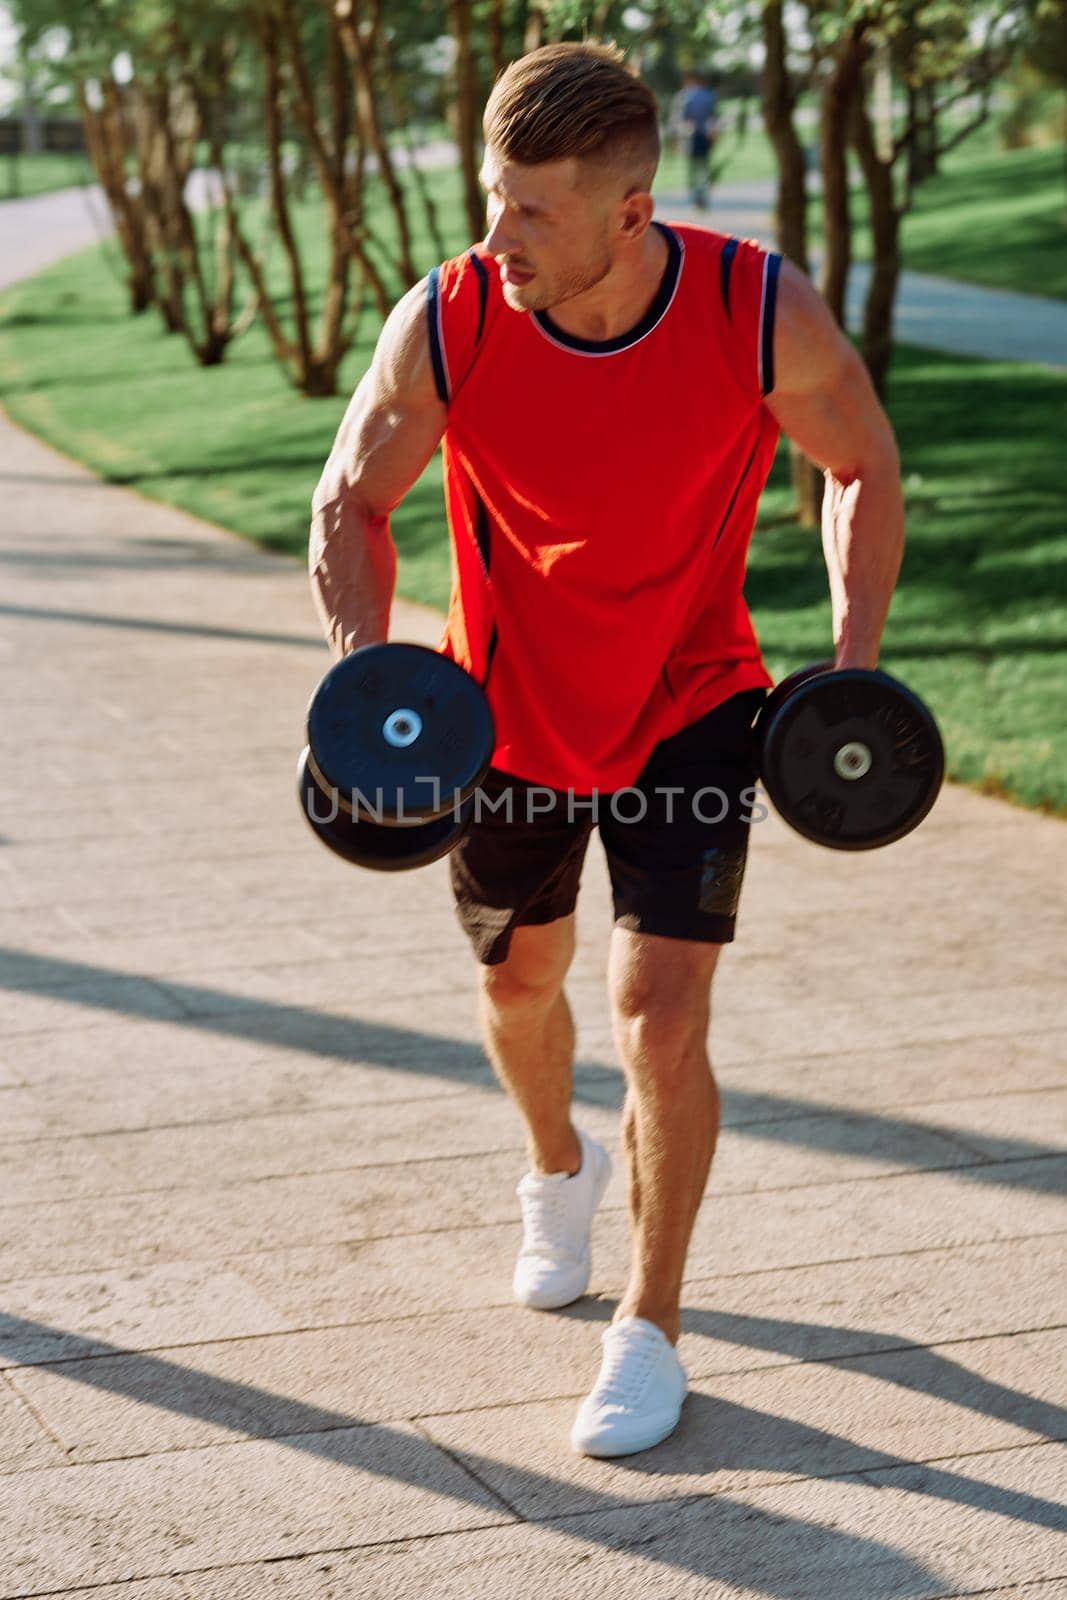 athletic man with dumbbells in his hands outdoors in the park by Vichizh